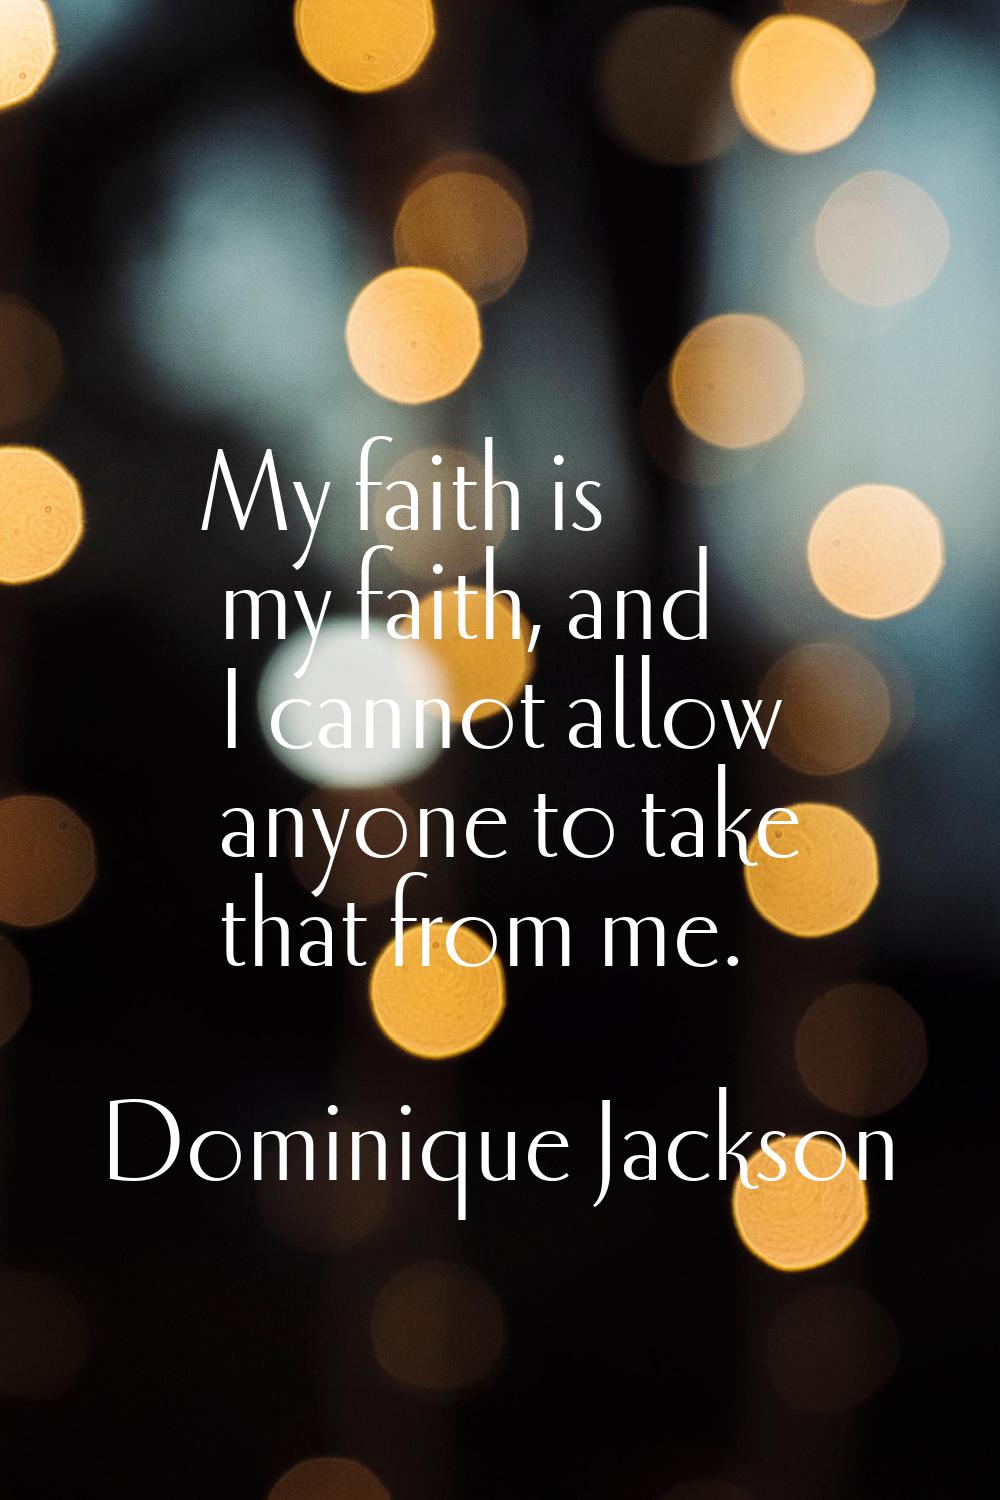 My faith is my faith, and I cannot allow anyone to take that from me.